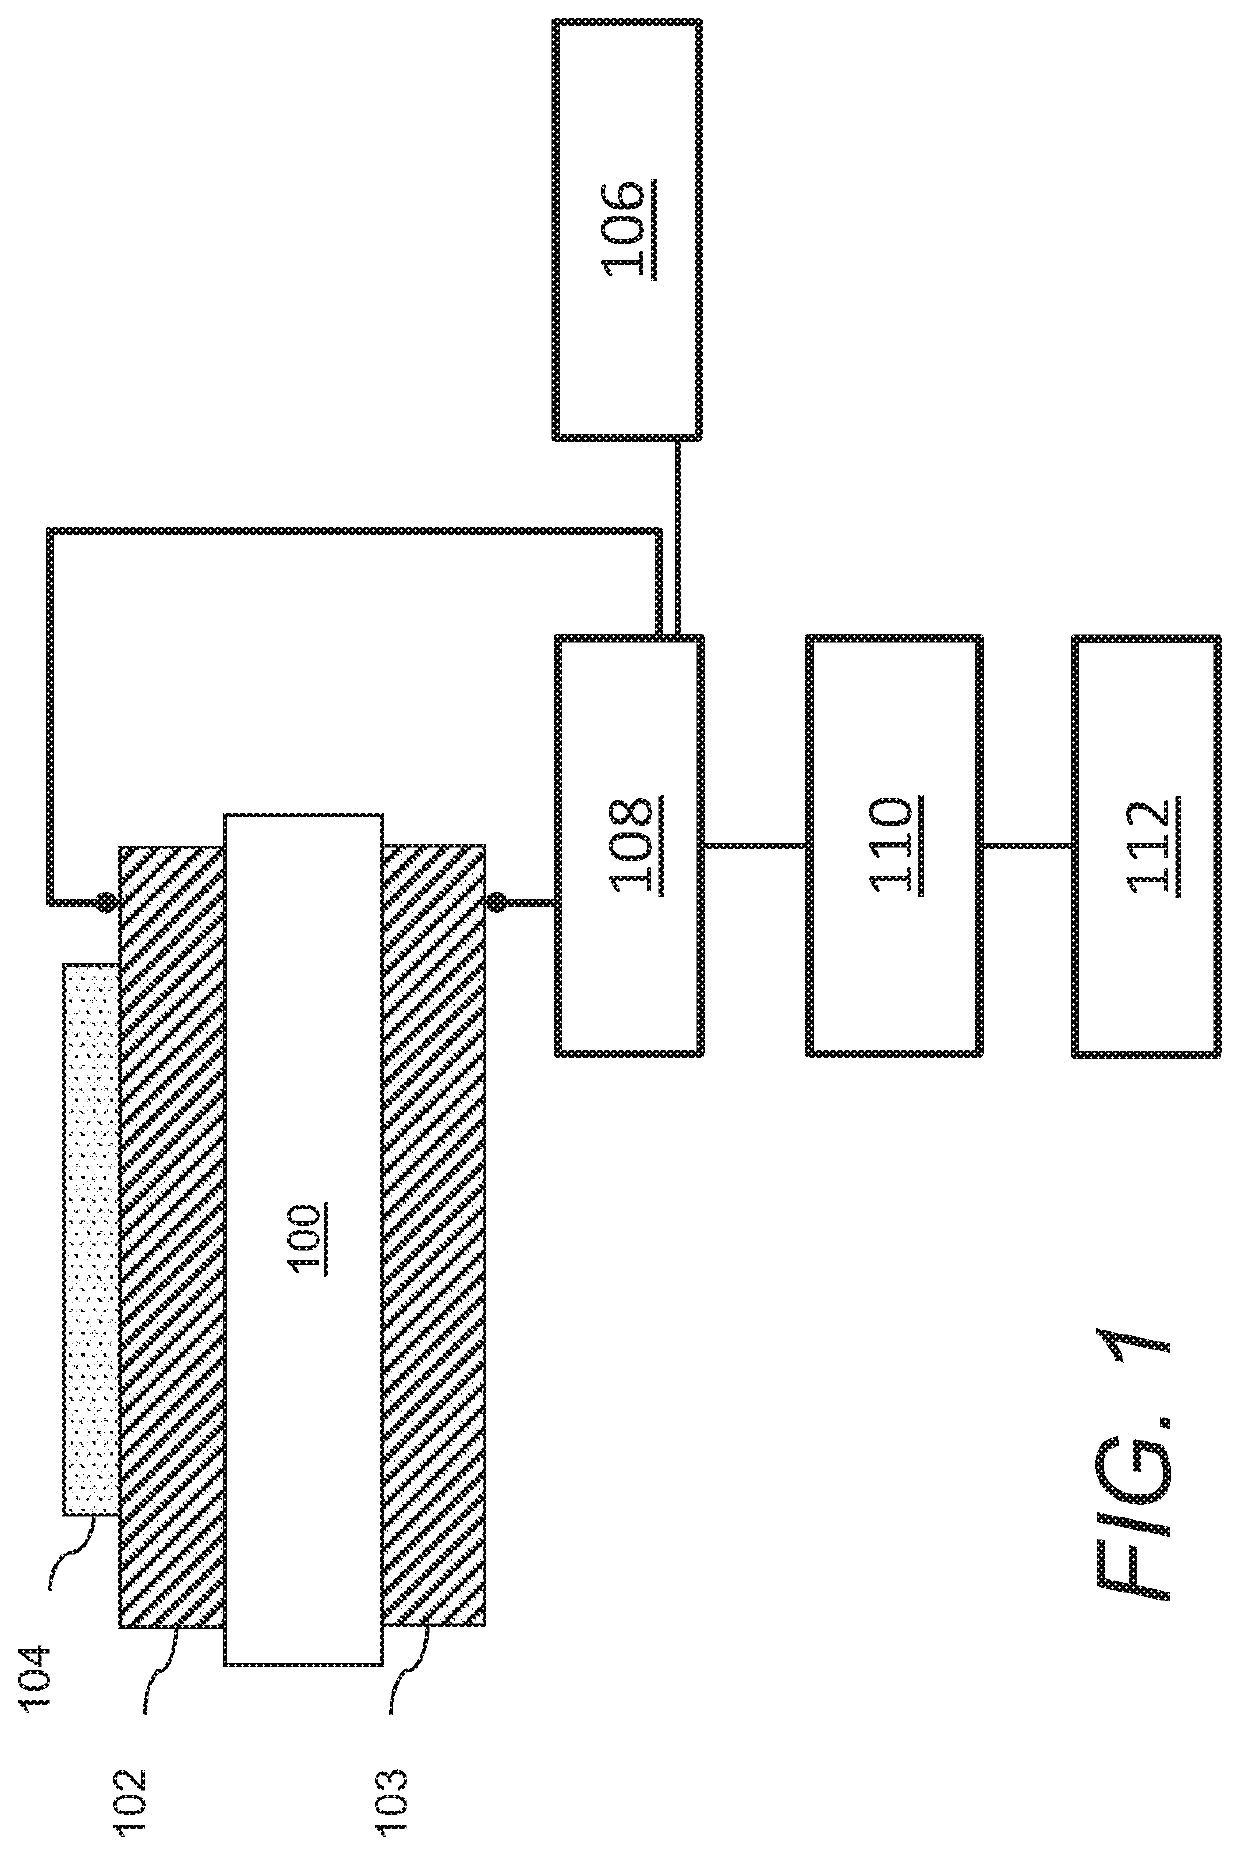 Acoustic wave sensors and methods of sensing a gas-phase analyte